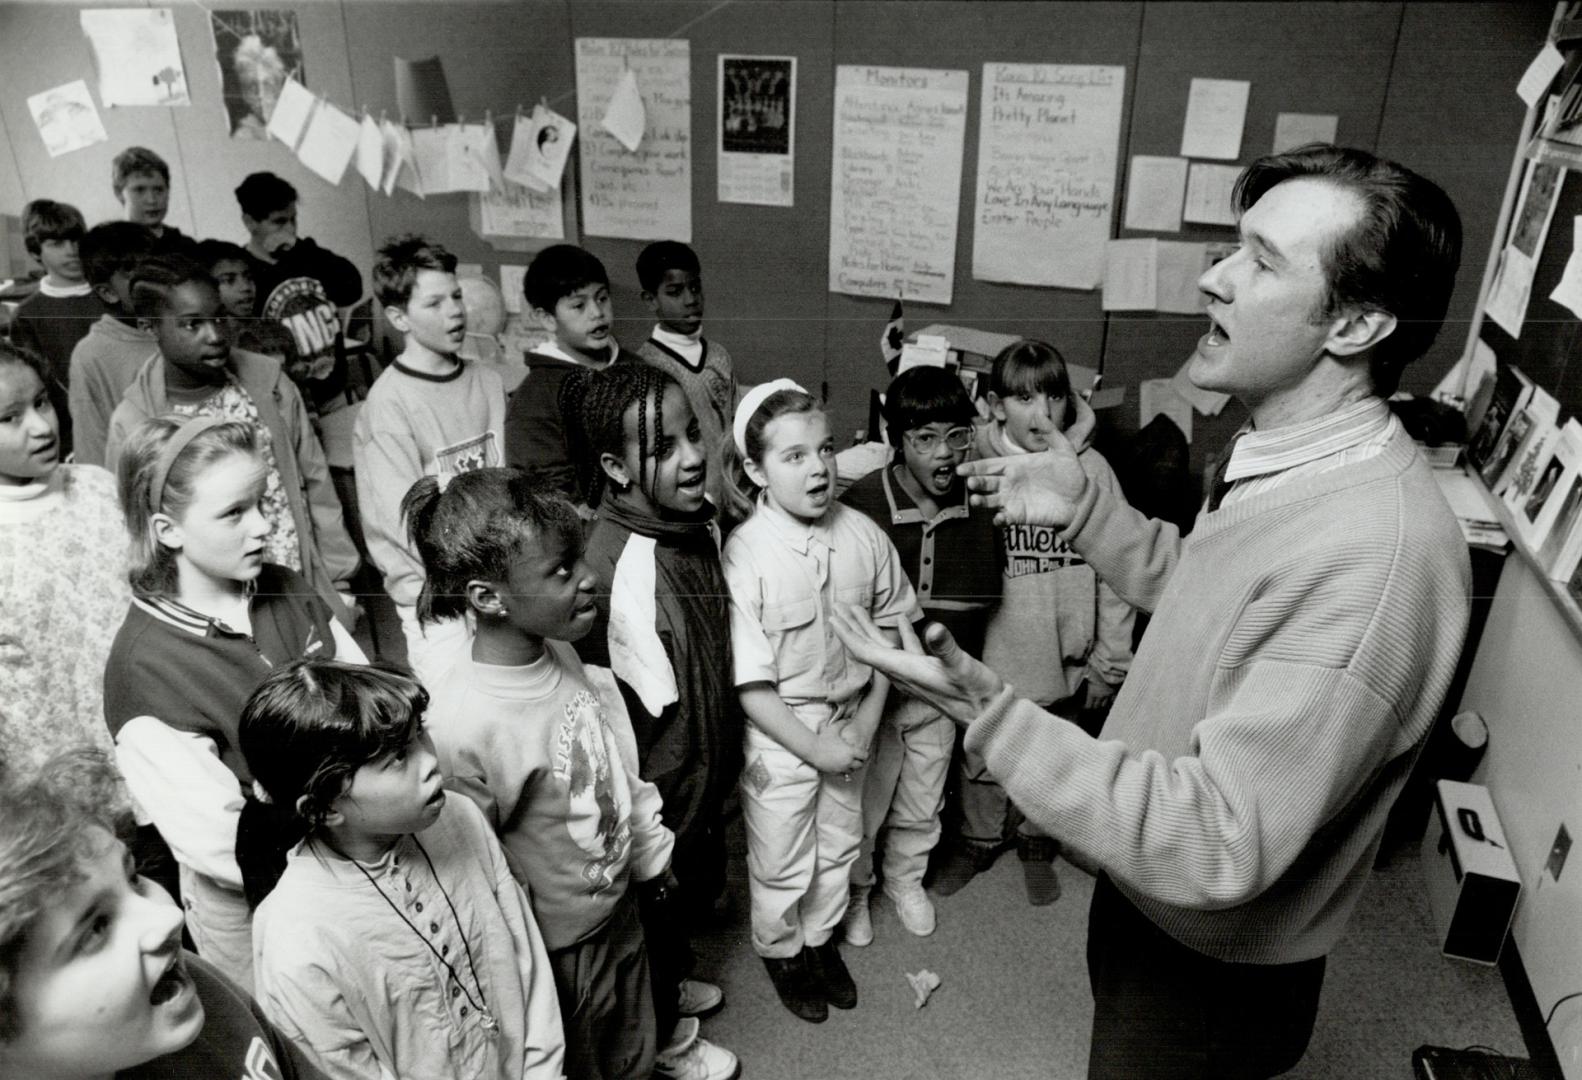 Larry Folk, a Metro music teacher reassigned to a regular class, leads a lunch-hour choir practice at St. Thomas More school.